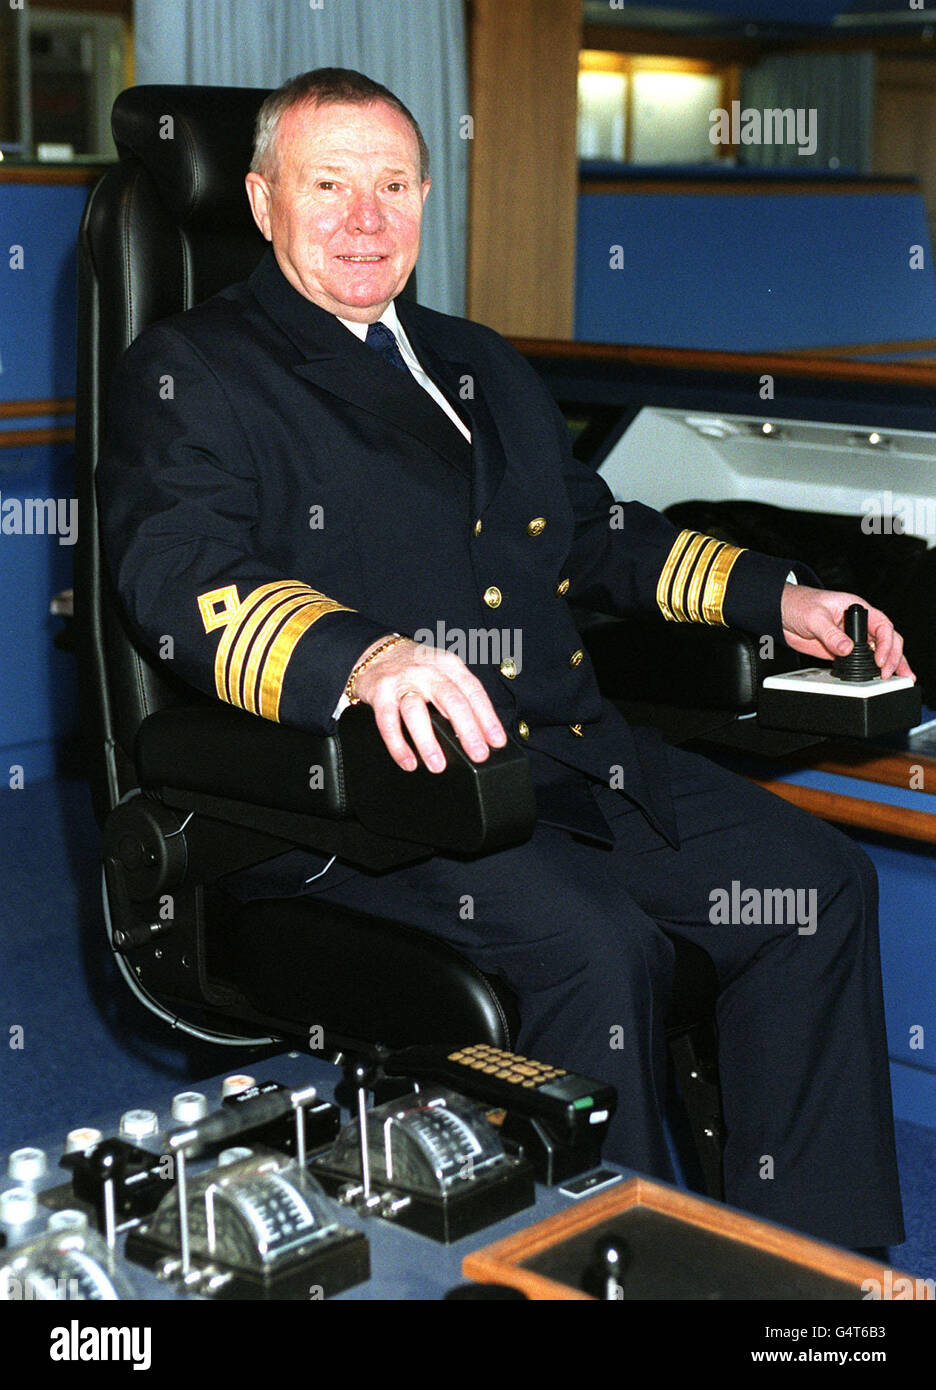 Captain Svein Pettersen on the bridge of the world's biggest cruise liner, the Voyager of the Seas. The ship was built for the Royal Caribbean Cruises at the Kvaerner Masa-Yards' Turku New Shipyard, and left Turku, Finland, on route for its delivery to RCC in Miami, Florida, USA. Stock Photo